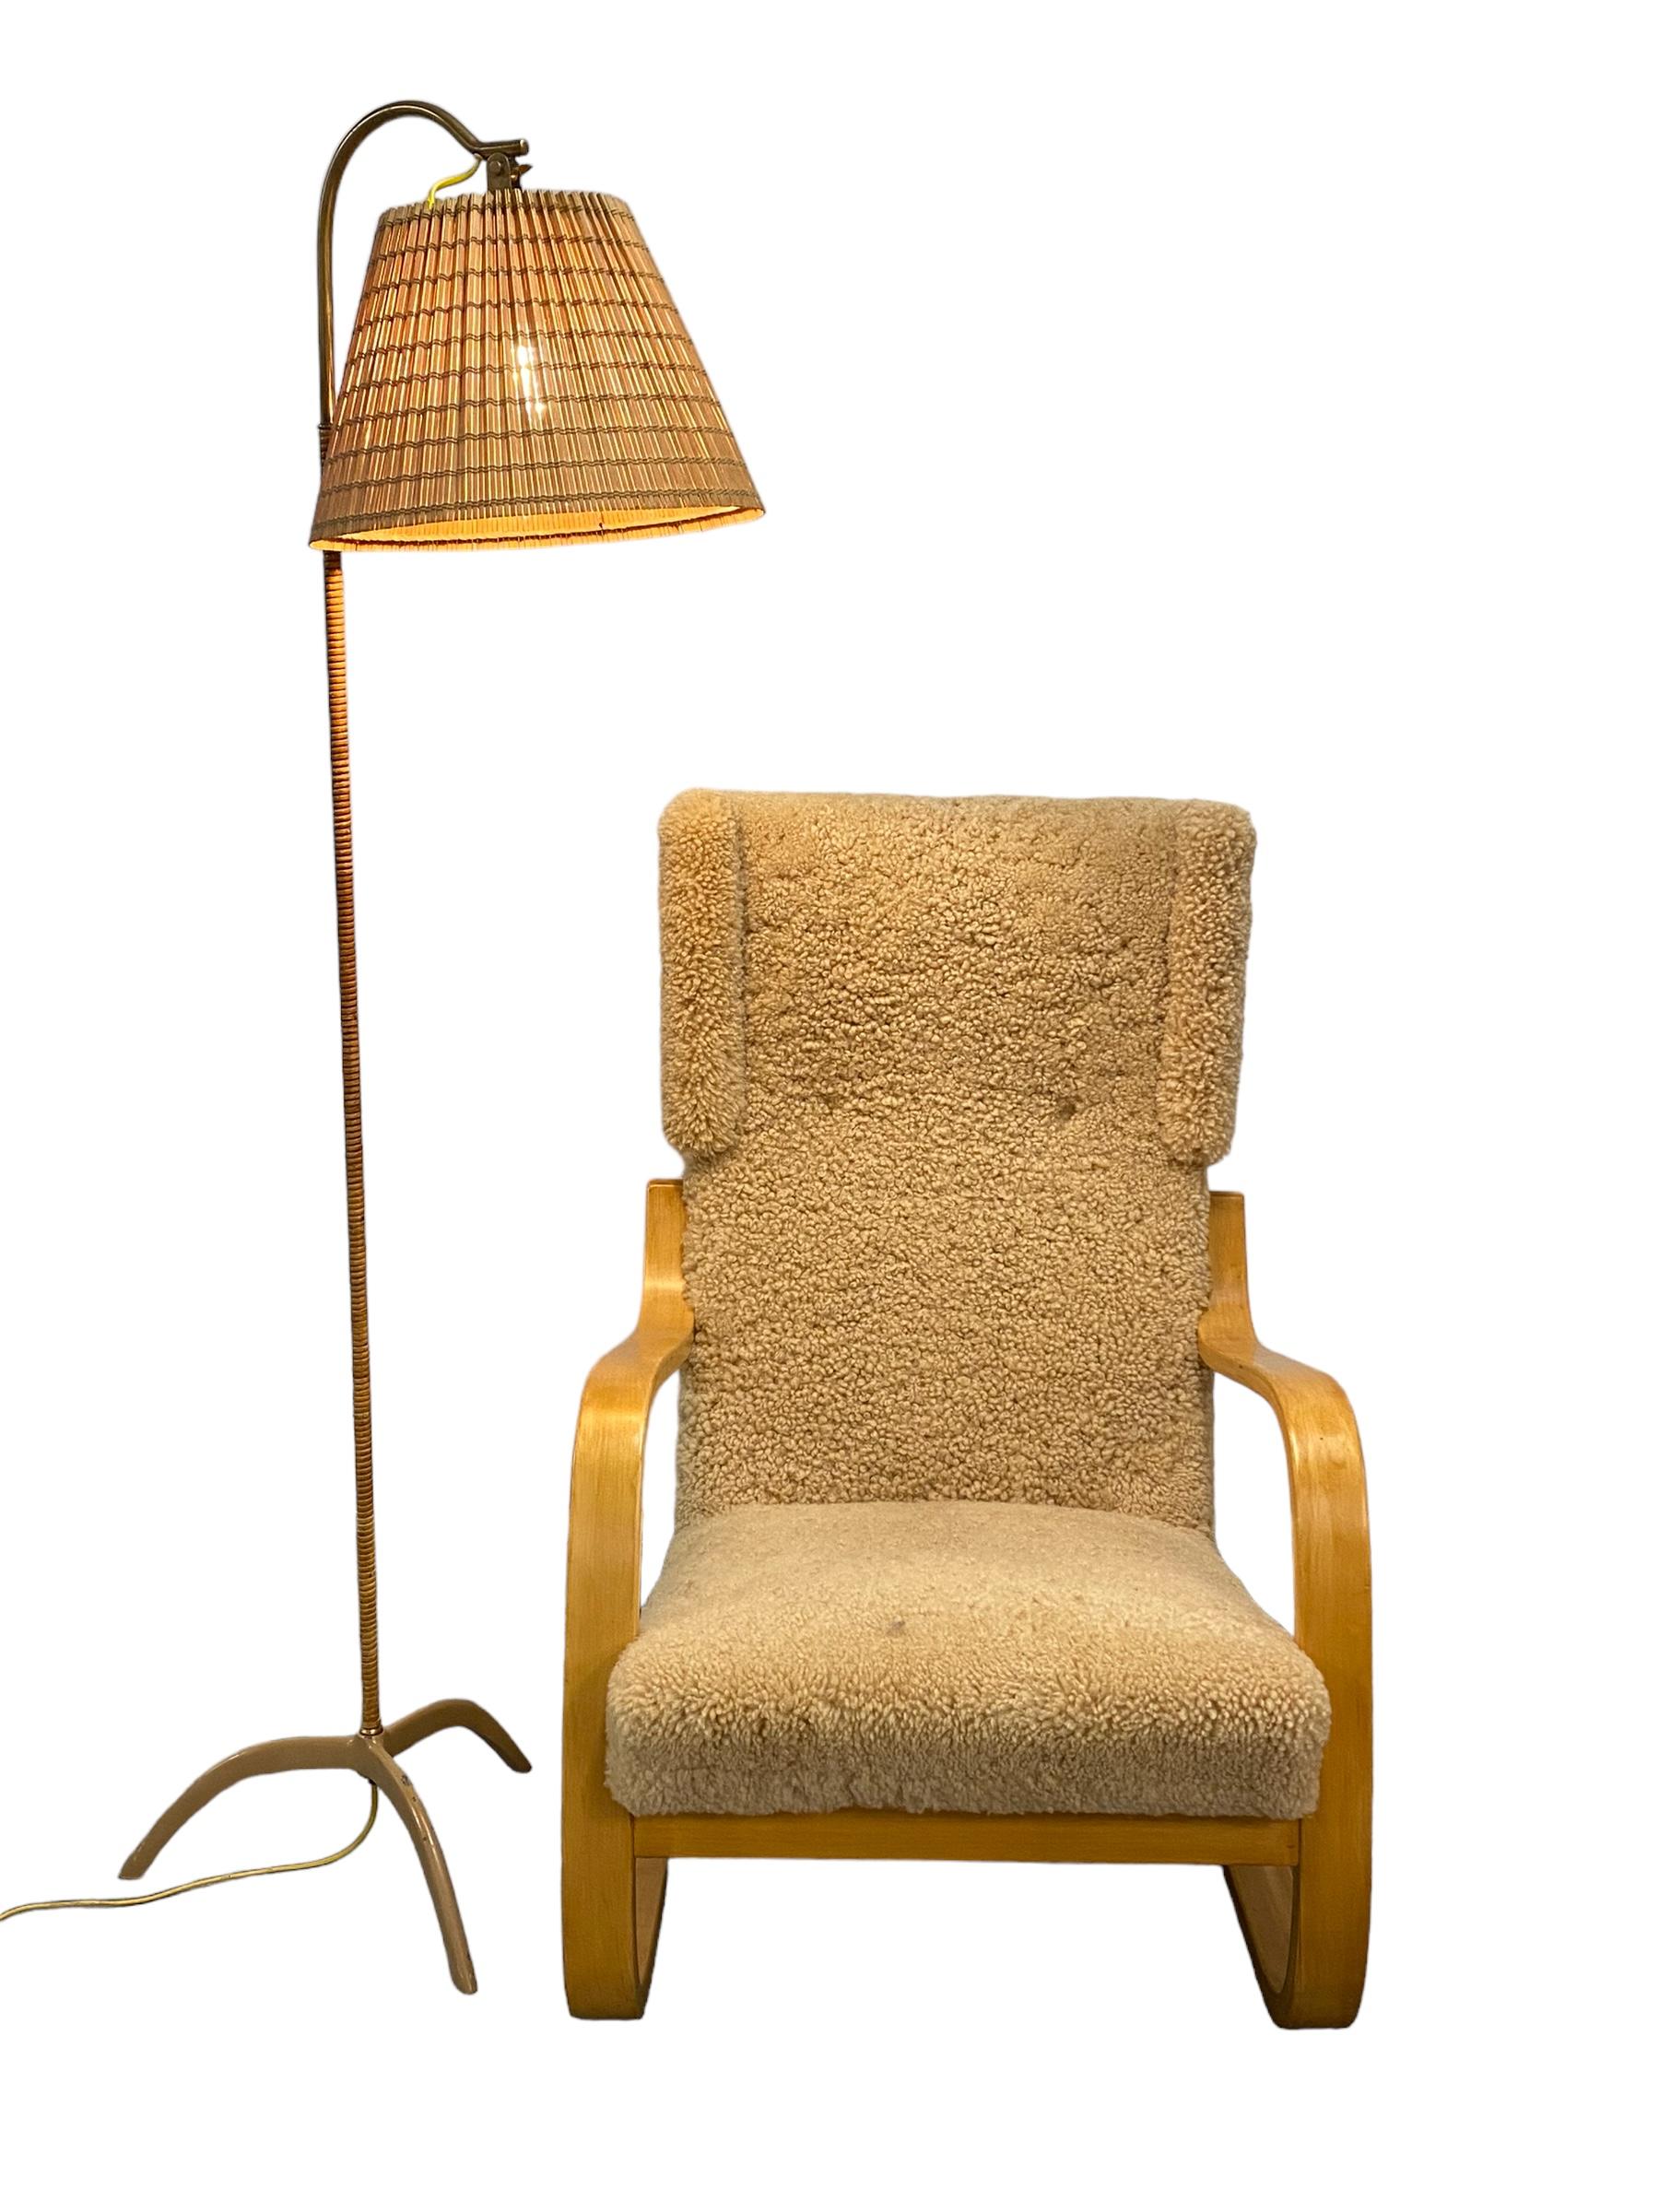 Paavo Tynell Floor Lamp model. 9609, Taito Oy 1950s For Sale 5